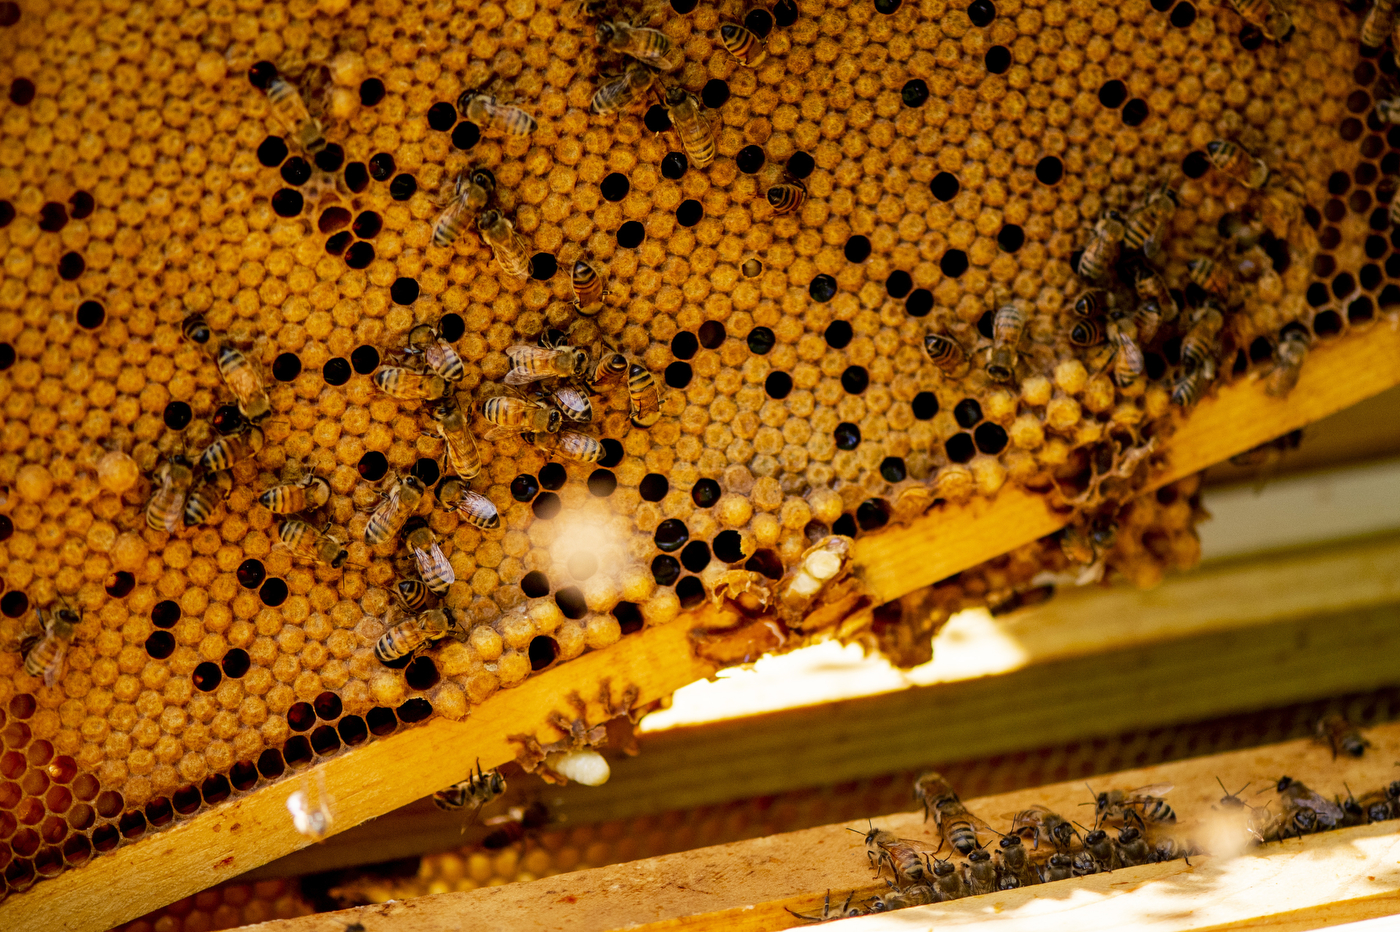 A beehive frame